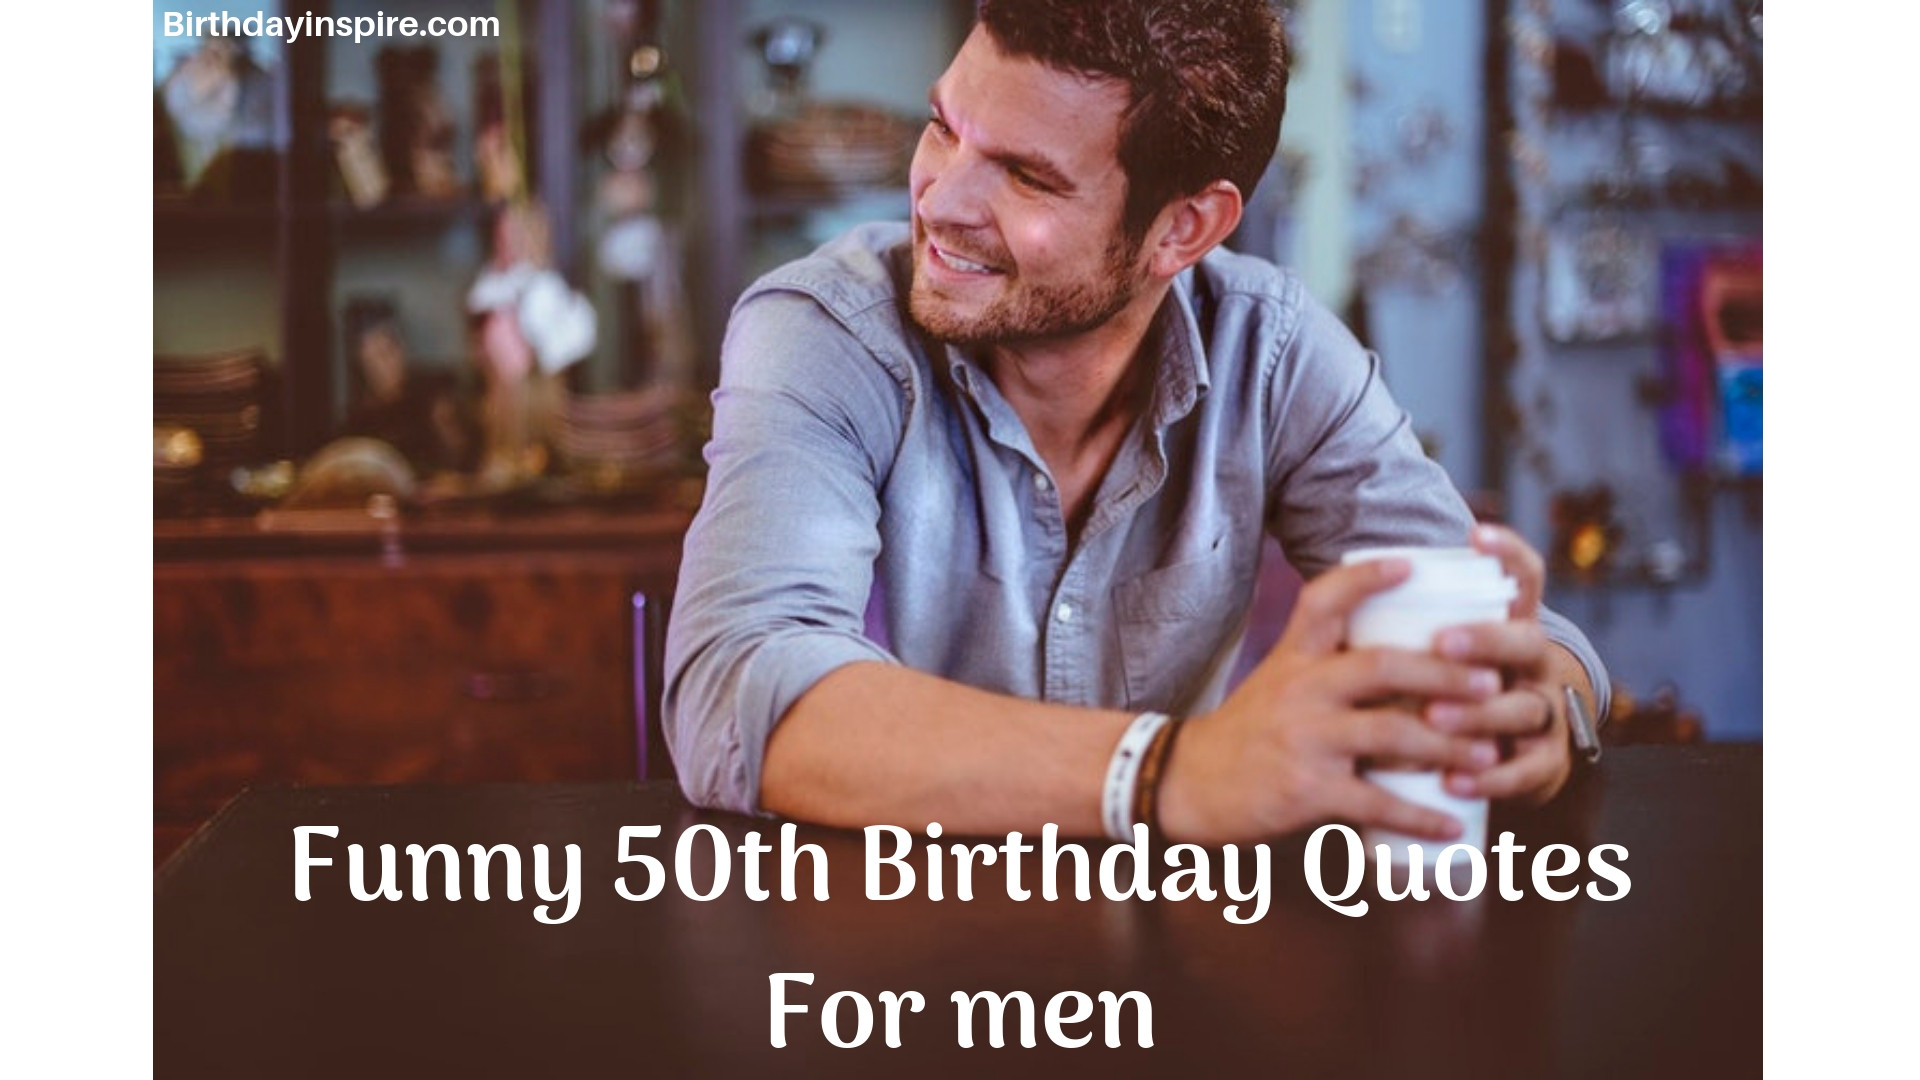 Funny Birthday Quotes For Guys
 45 Hilarious 50th Birthday Quotes For MenBirthday Inspire